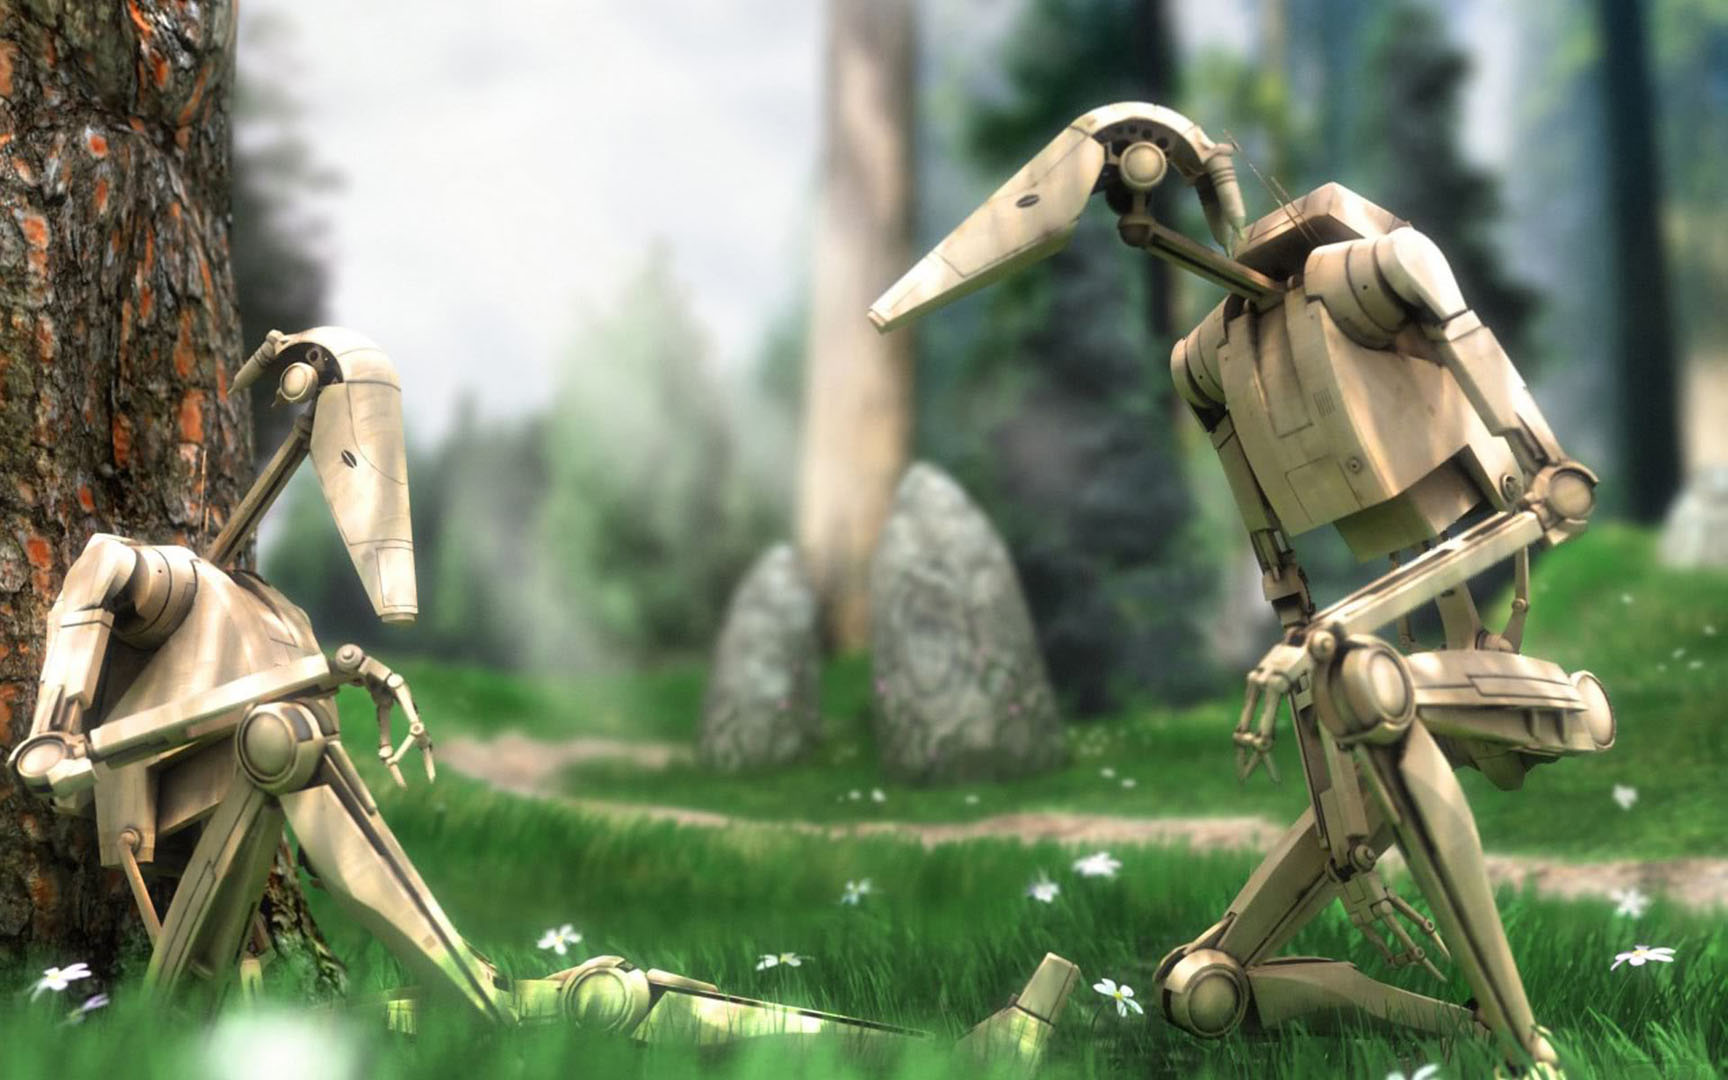 Free download Battle Droids Action Games Wallpaper Image featuring Star